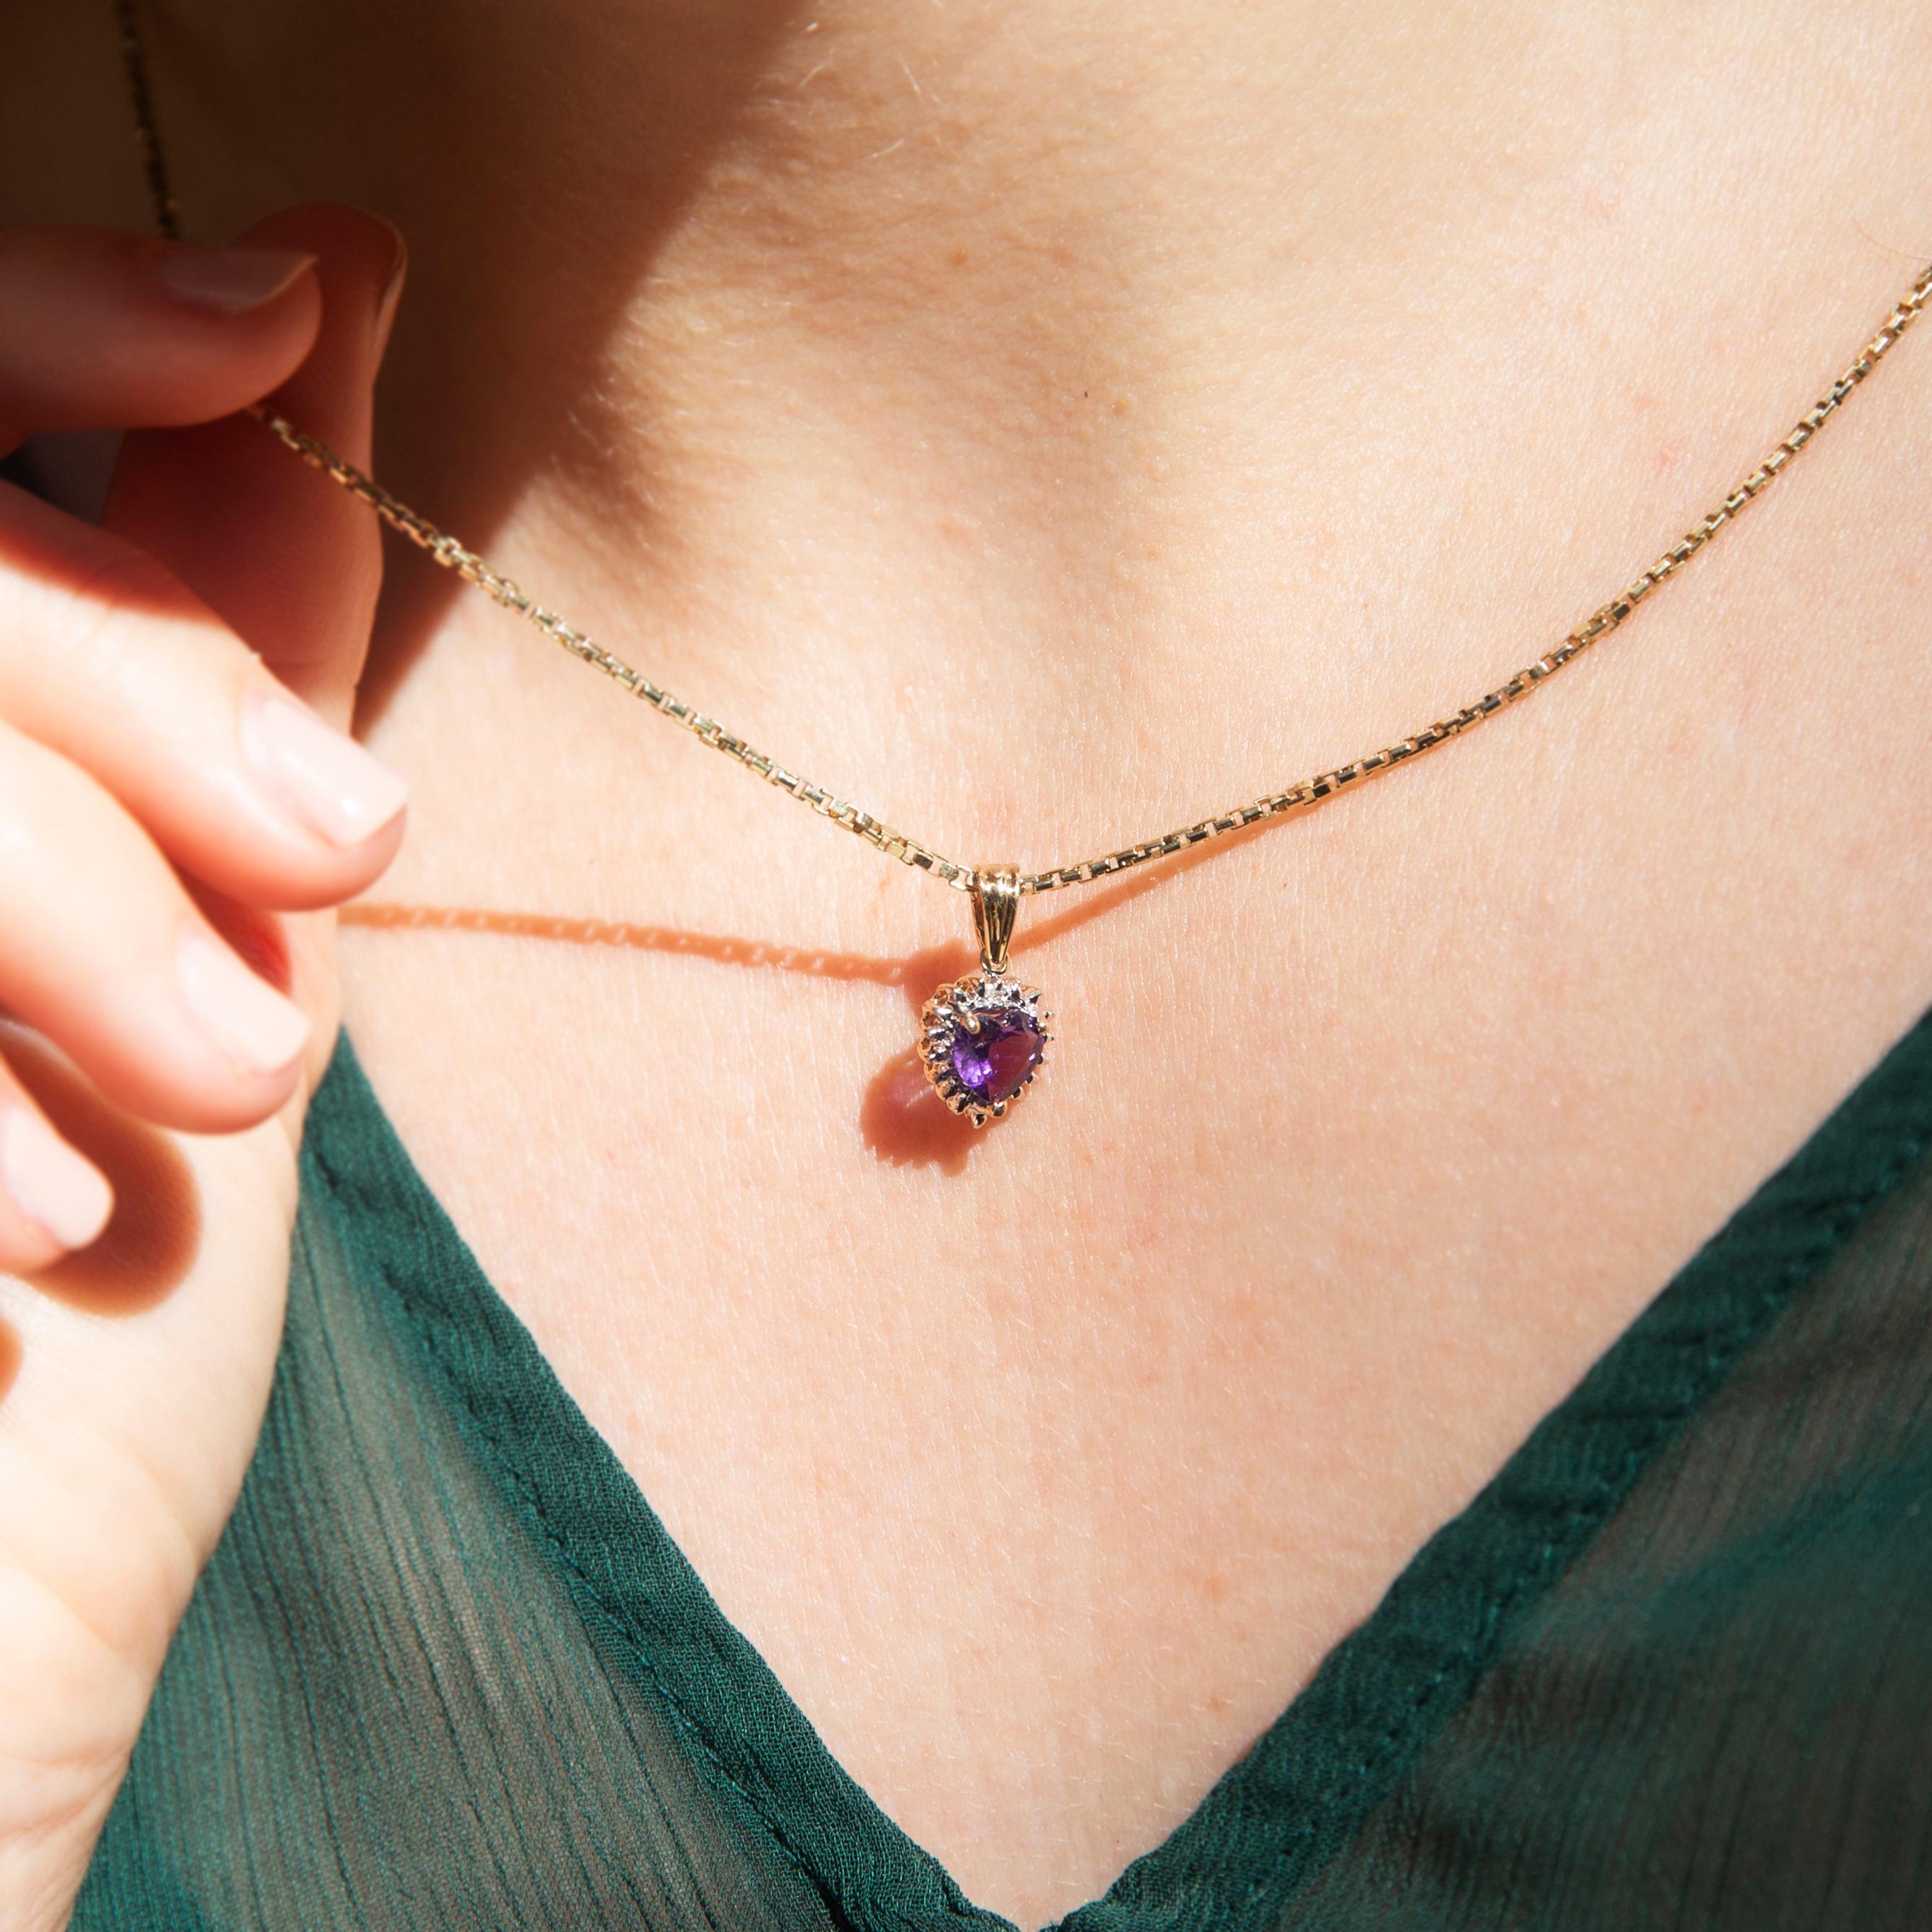 Crafted in 14 carat gold, this charming vintage pendant, circa 1990s, features a darling heart-shaped amethyst in a claw setting articulating from an elegant bail threaded with a fine belcher chain. Her name is The Elise Pendant & Chain. She is an